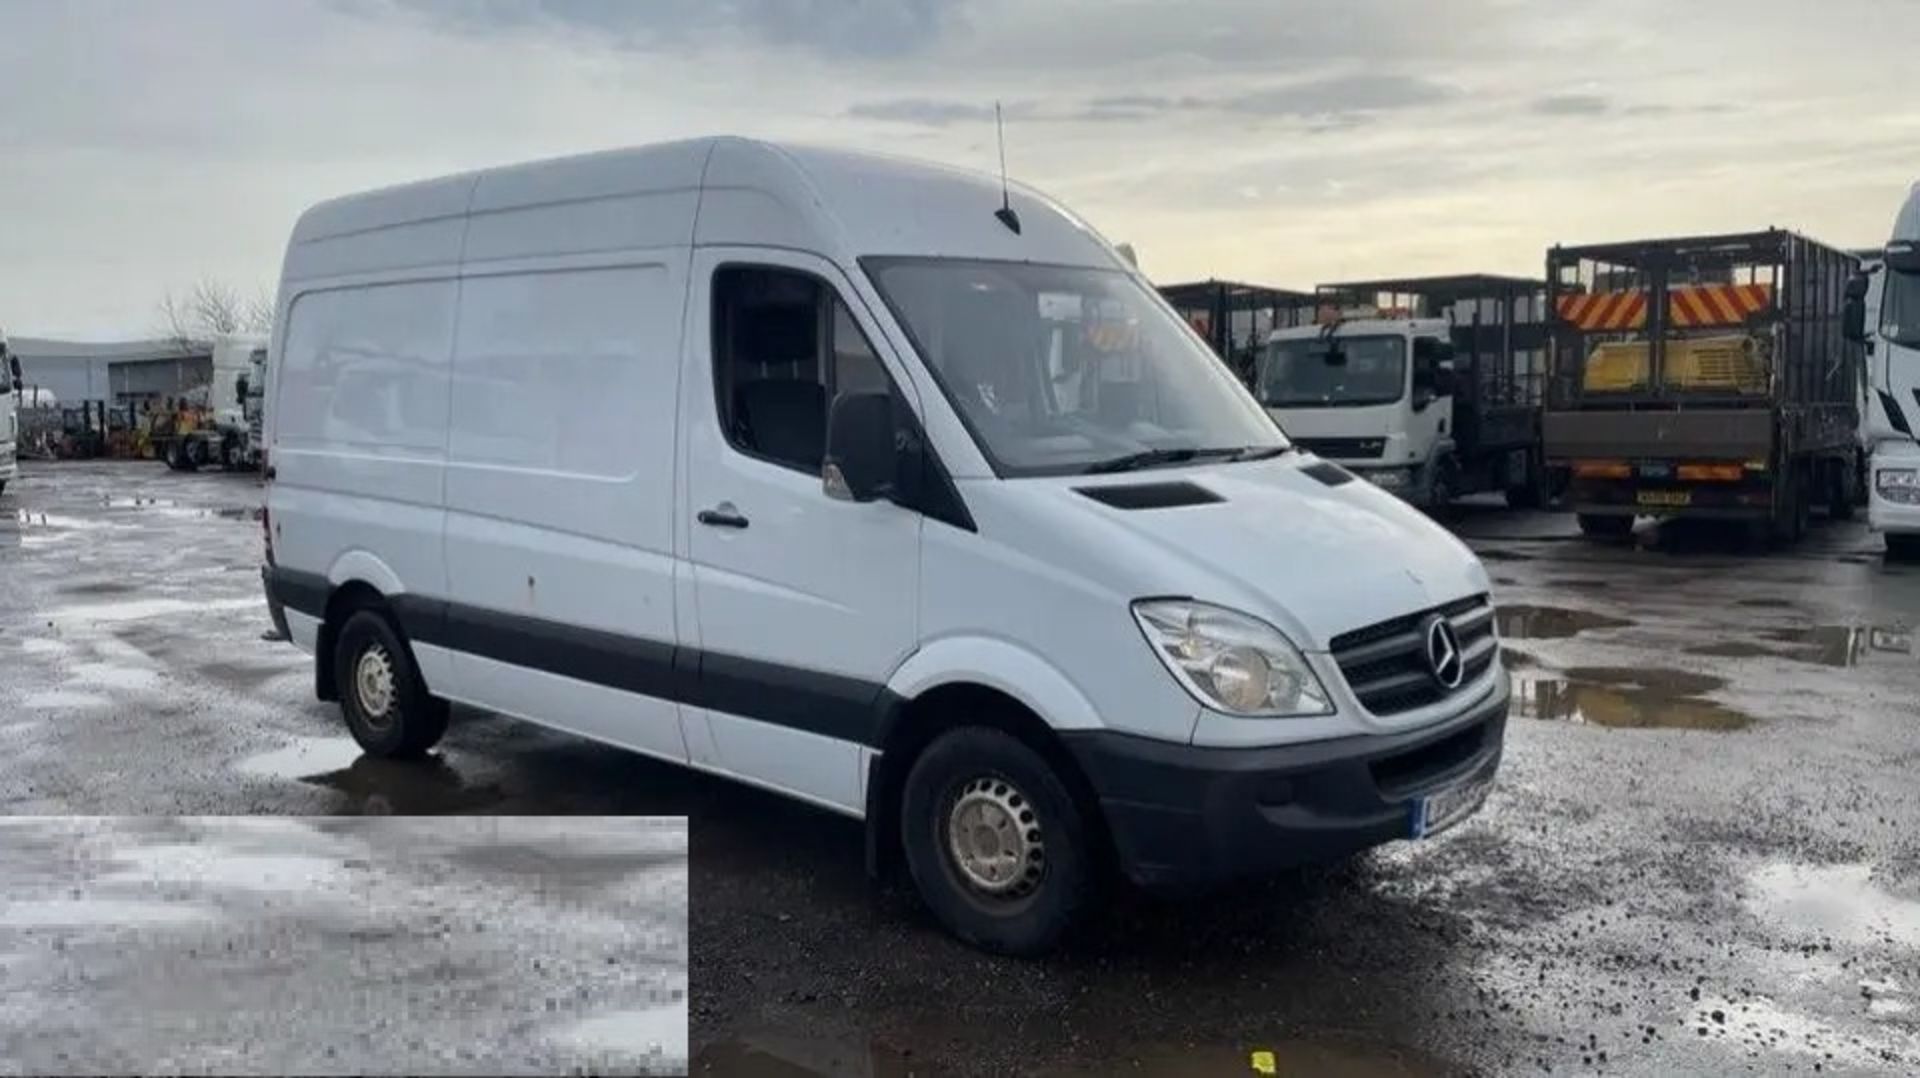 MERCEDES-BENZ SPRINTER 2013 - DIRECT FROM FEDEX, IDEAL FOR HEAVY DUTY - Image 12 of 13